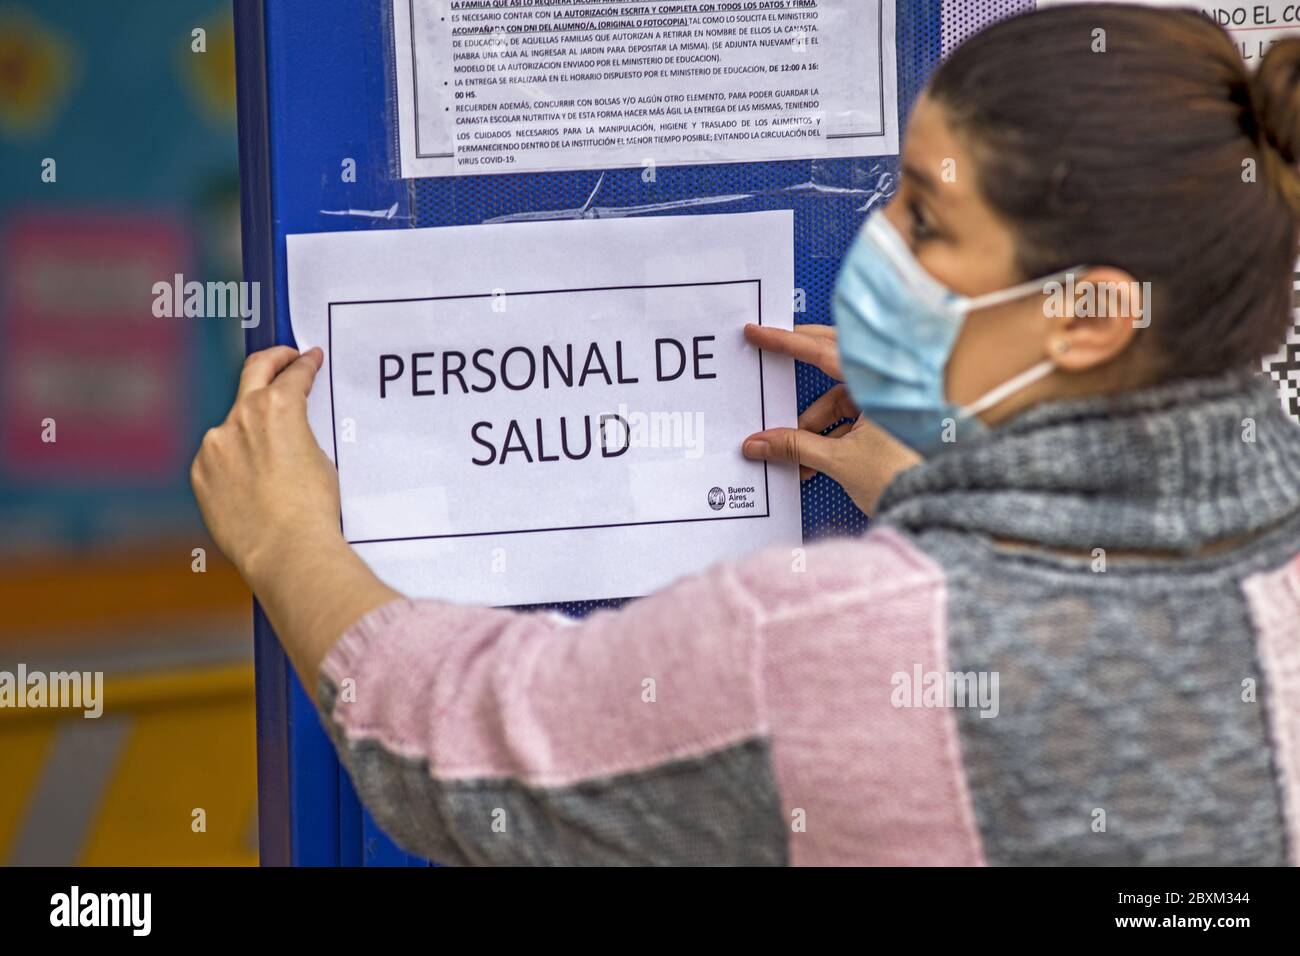 June 7, 2020, Buenos Aires, Federal Capital, Argentina: After obtaining good results in the most vulnerable neighborhoods of the City of Buenos Aires, the authorities decided to extend the DETeCTar program (Strategic Testing Device for Coronavirus in the Field of Argentina) to other areas of the Capital City which consists of an active search for people with coronavirus. Since yesterday, Saturday, June 06, the operation began in the Balvanera neighborhood, the area where more cases were registered in the last five days, the objective will be to identify the close contacts of the 84 people in t Stock Photo